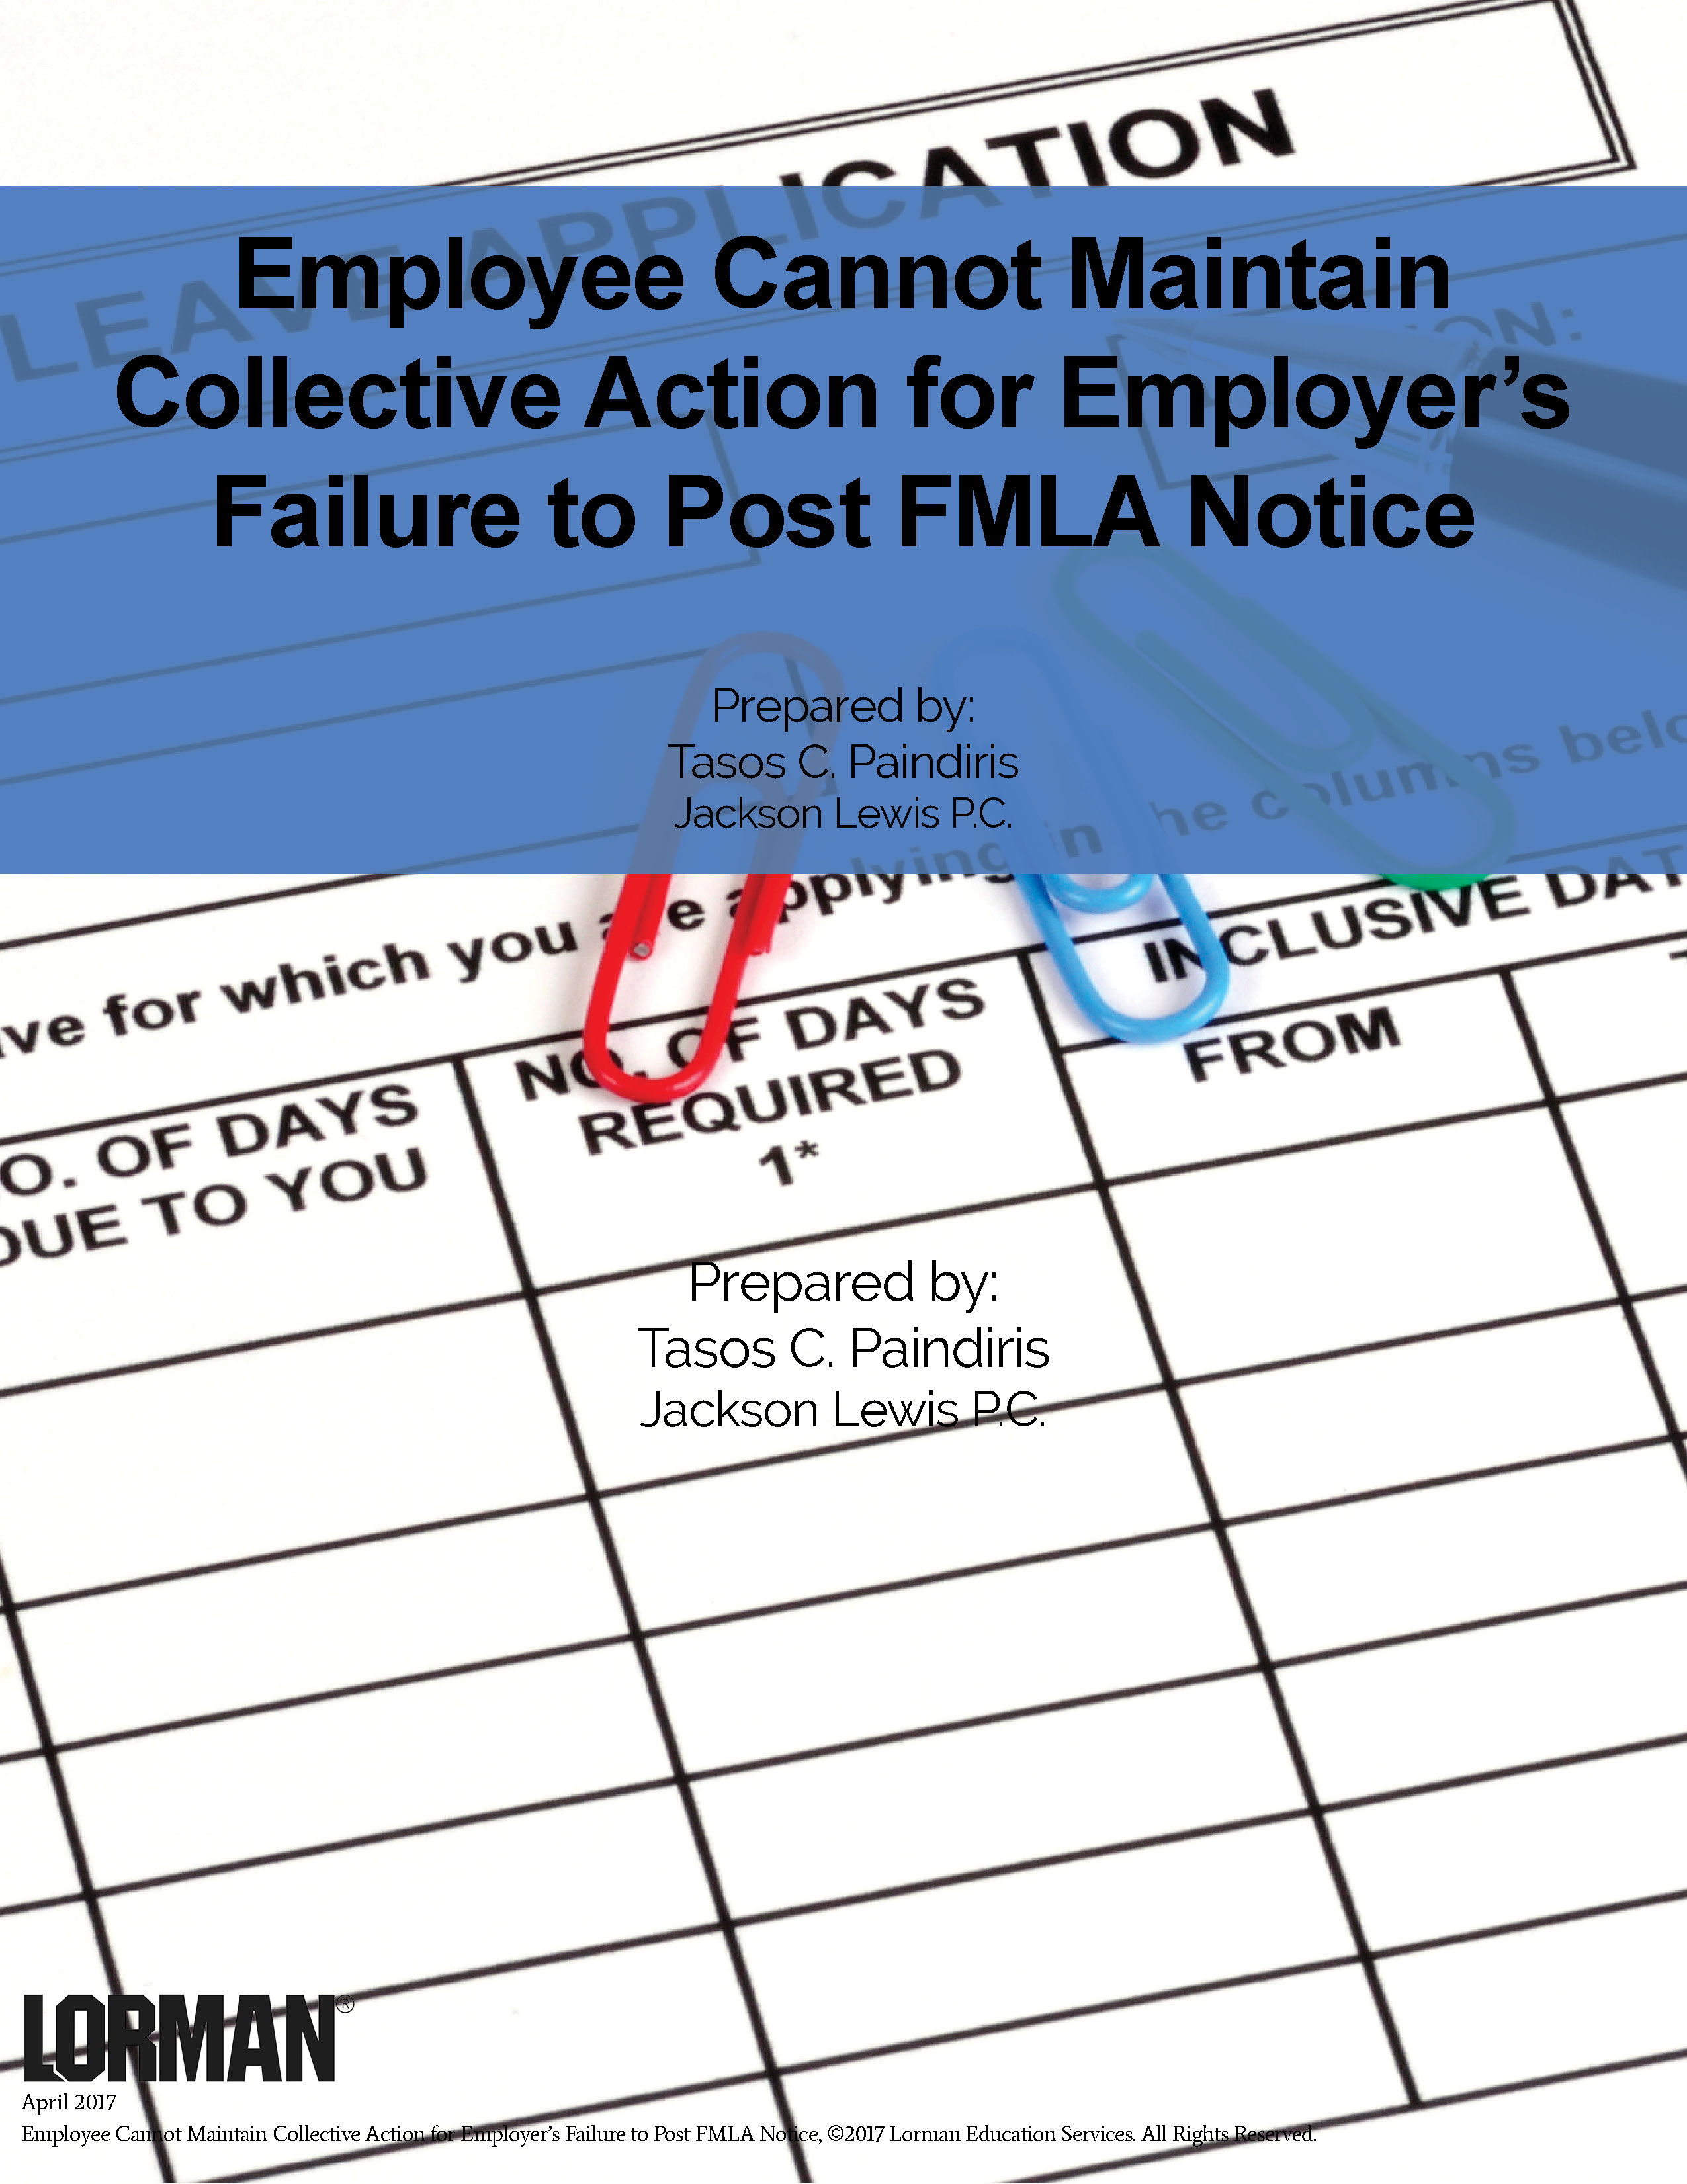 Employee Cannot Maintain Collective Action for Employer’s Failure to Post FMLA Notice